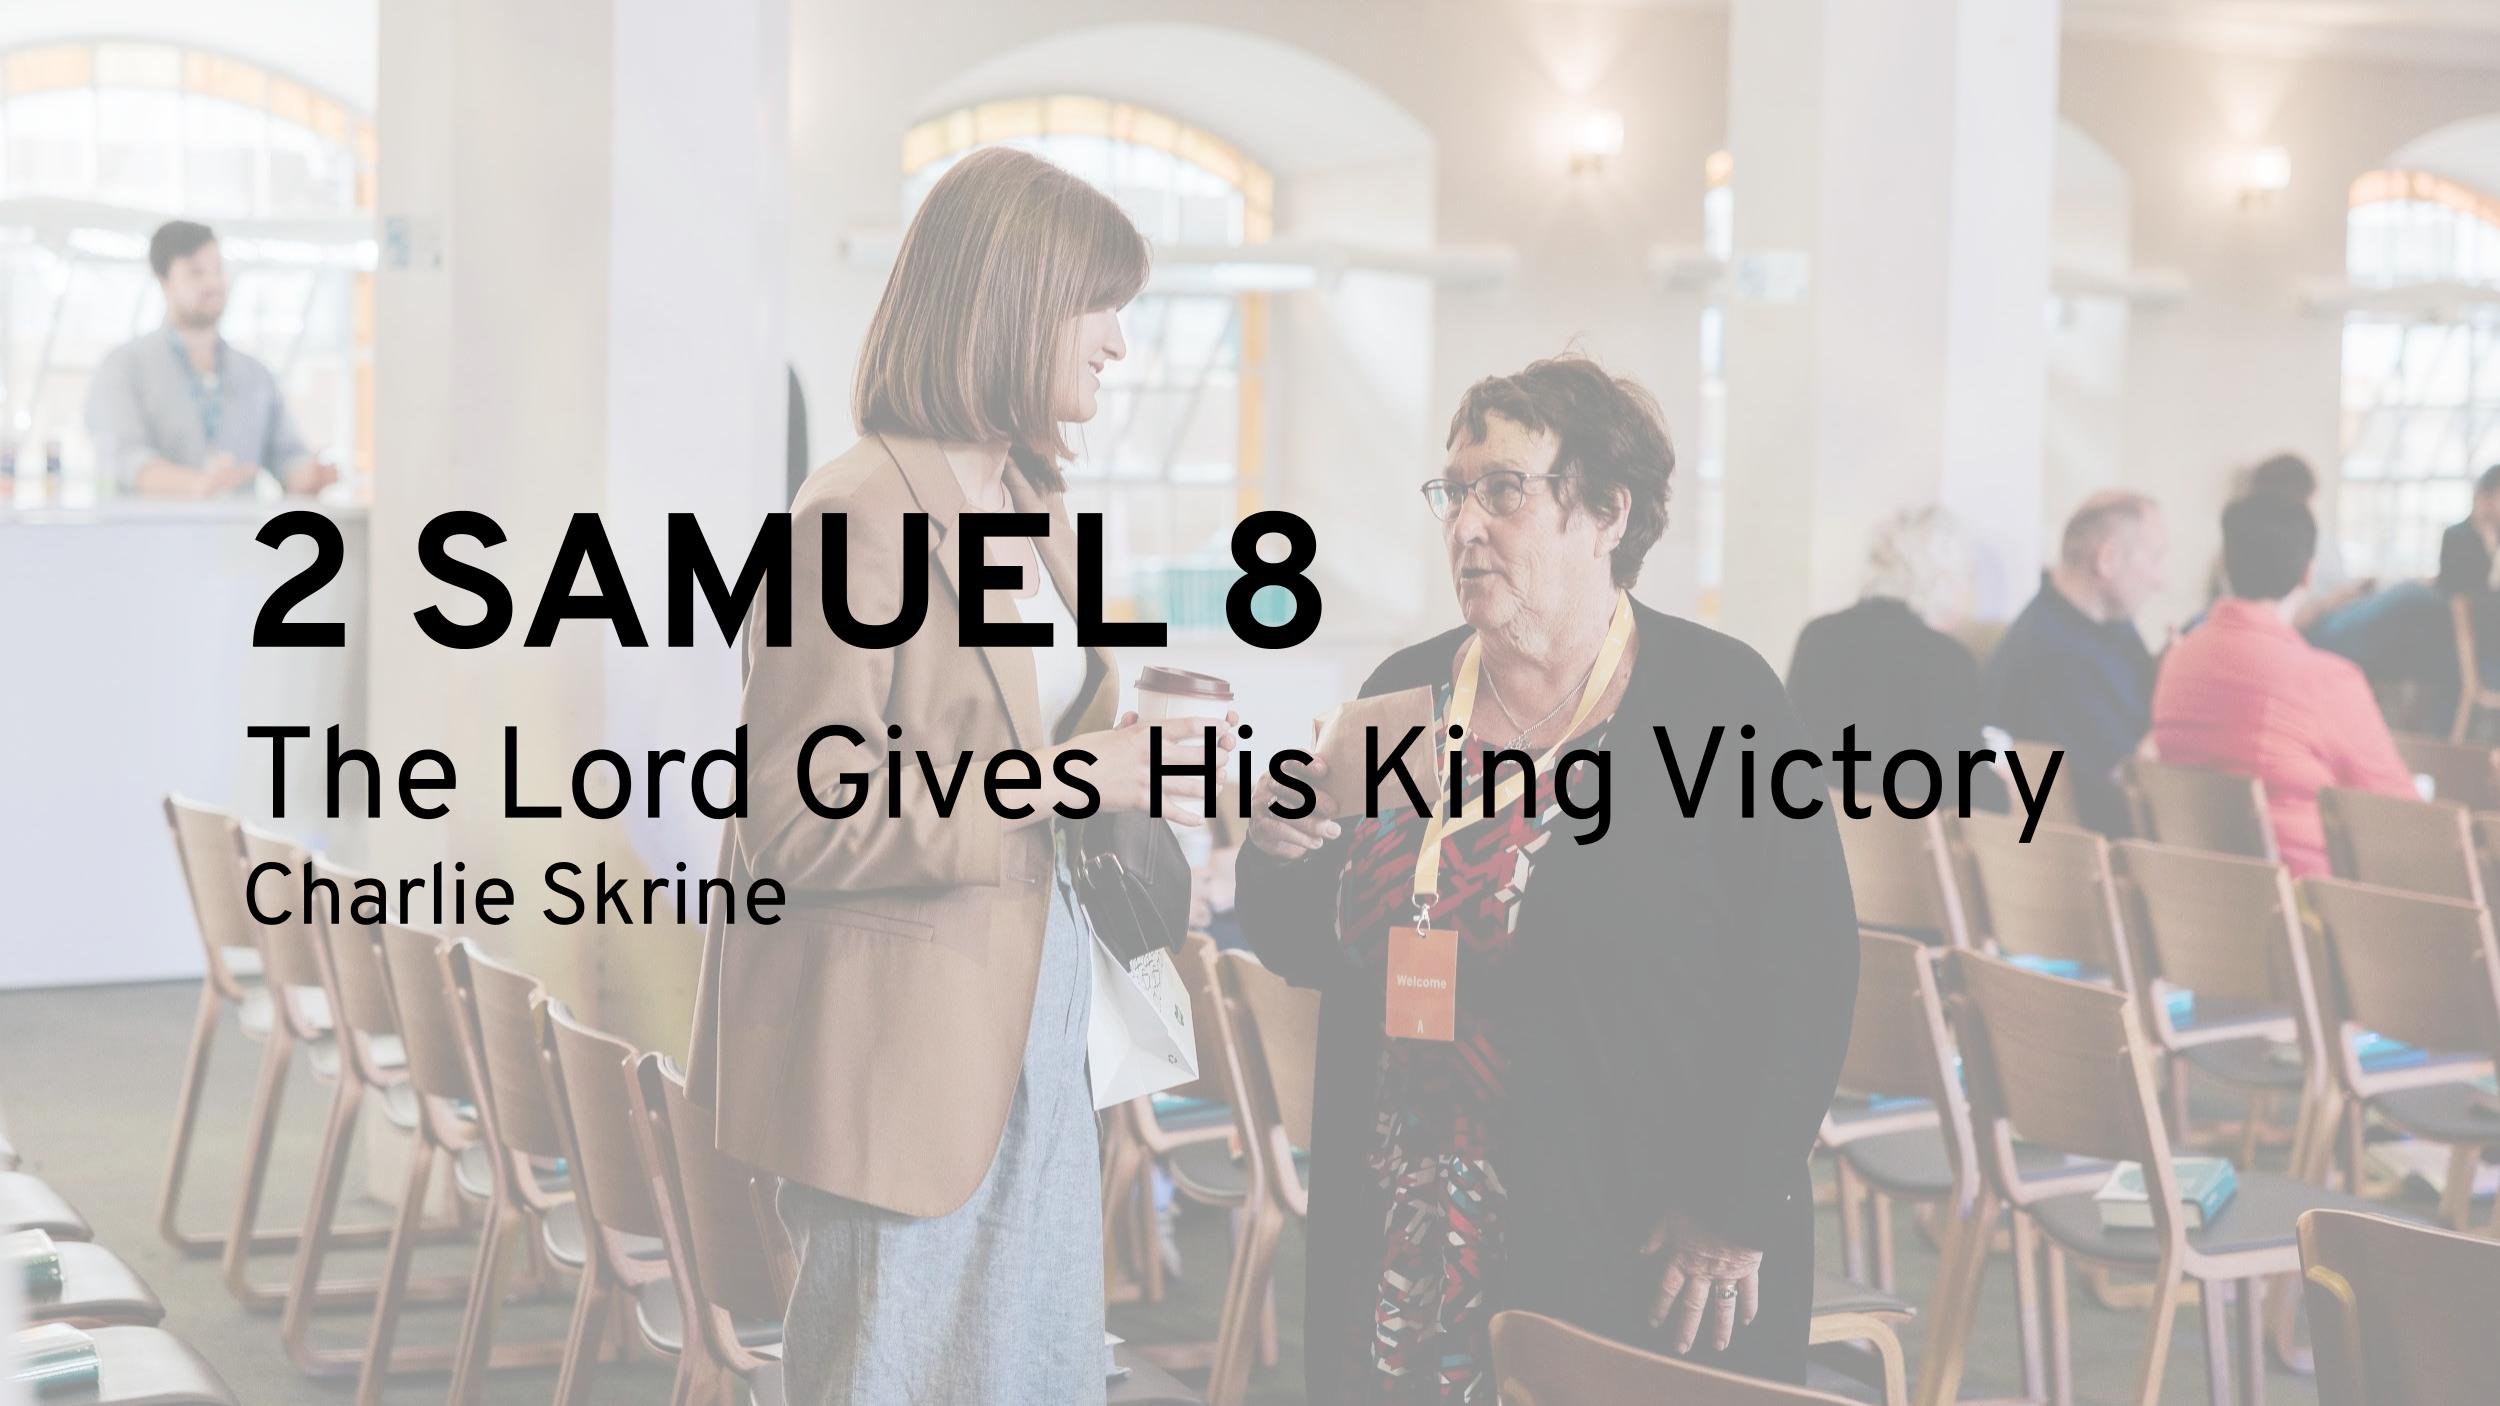 The Lord Gives His King Victory